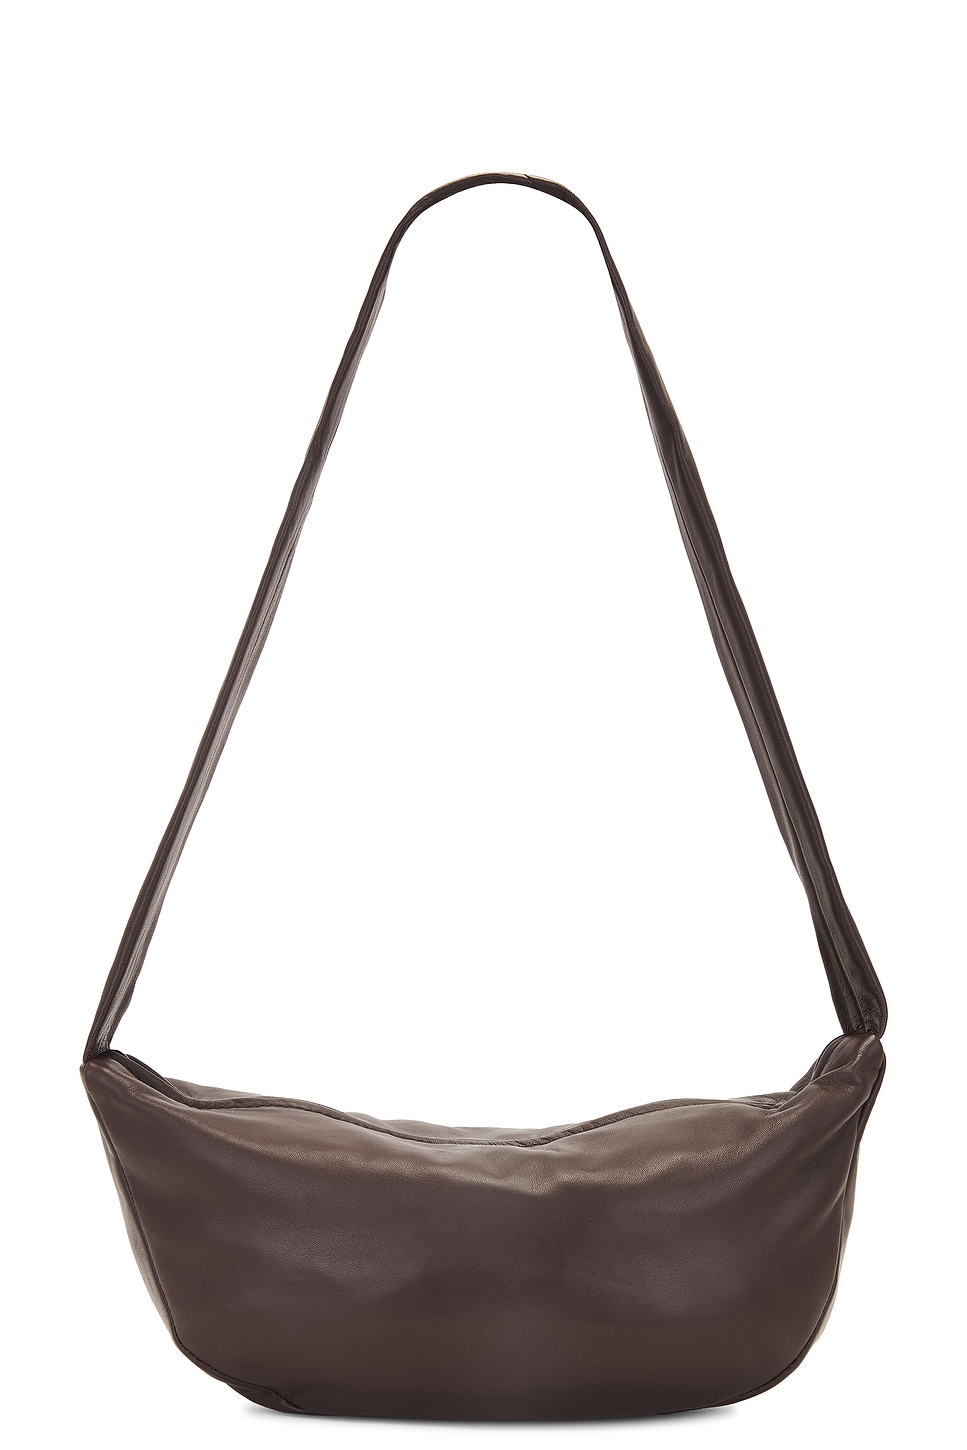 Soft Crescent Bag in Chocolate